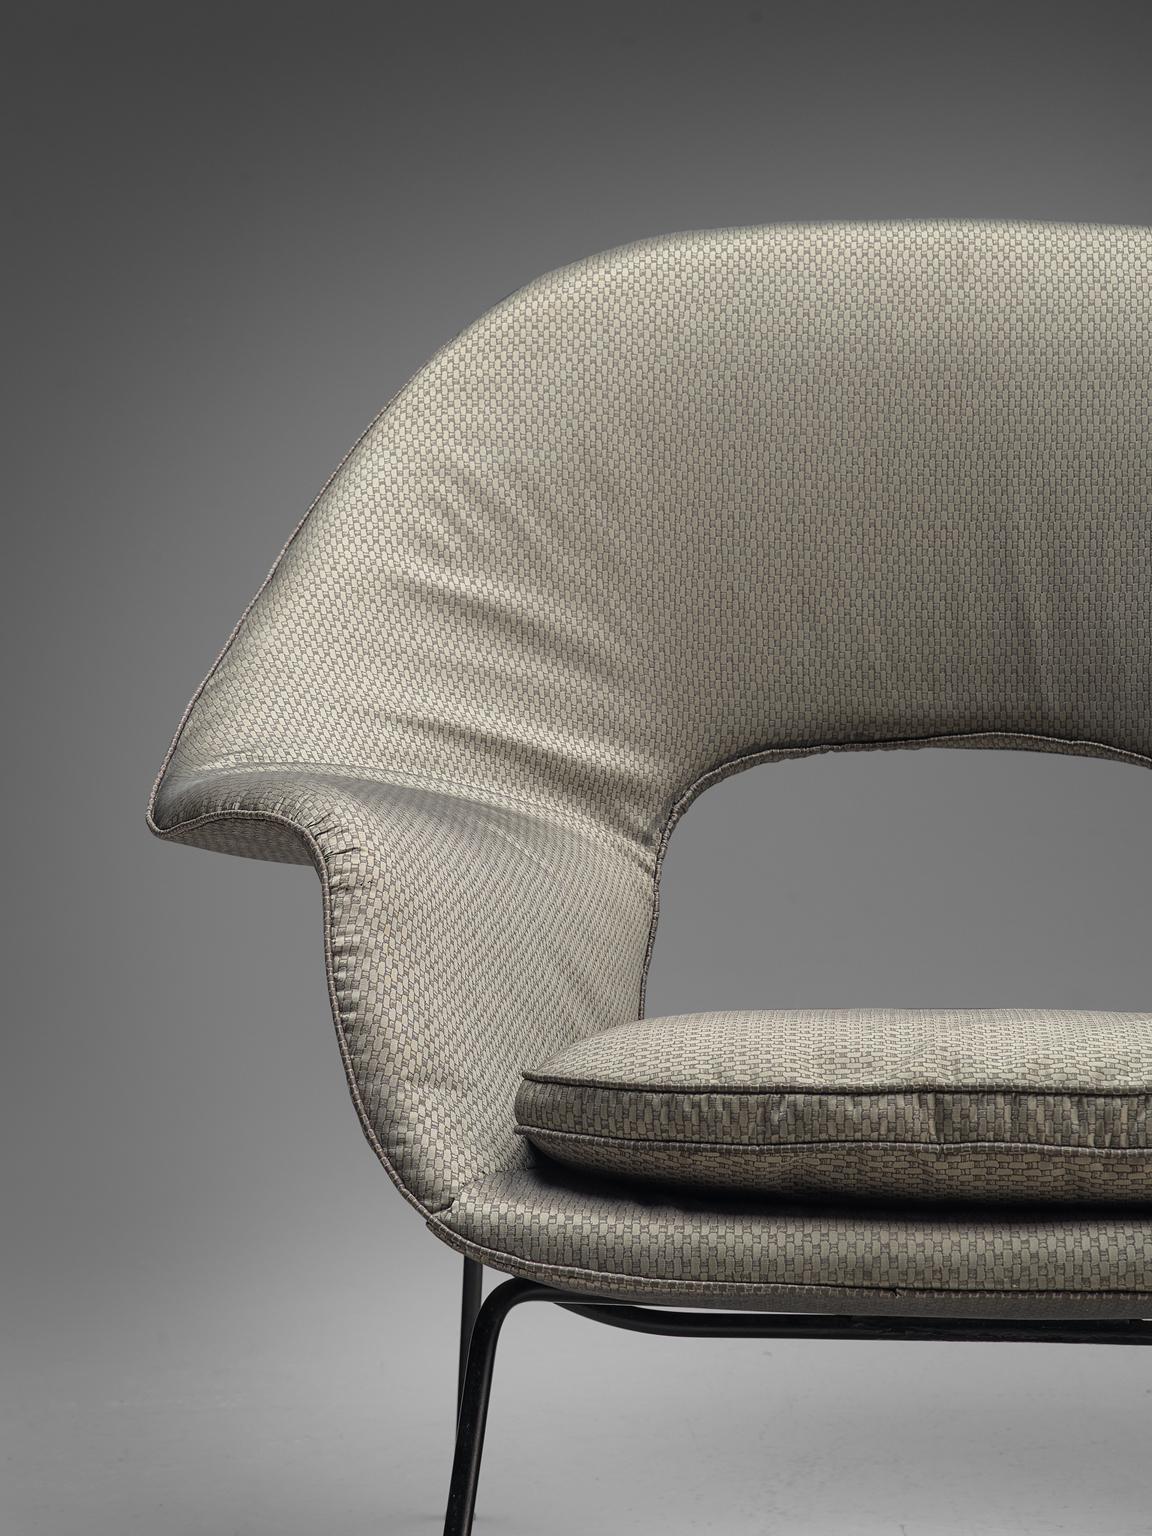 Mid-20th Century Rare and Early Model 'Womb' Chair with Metal Shell by Eero Saarinen for Knoll